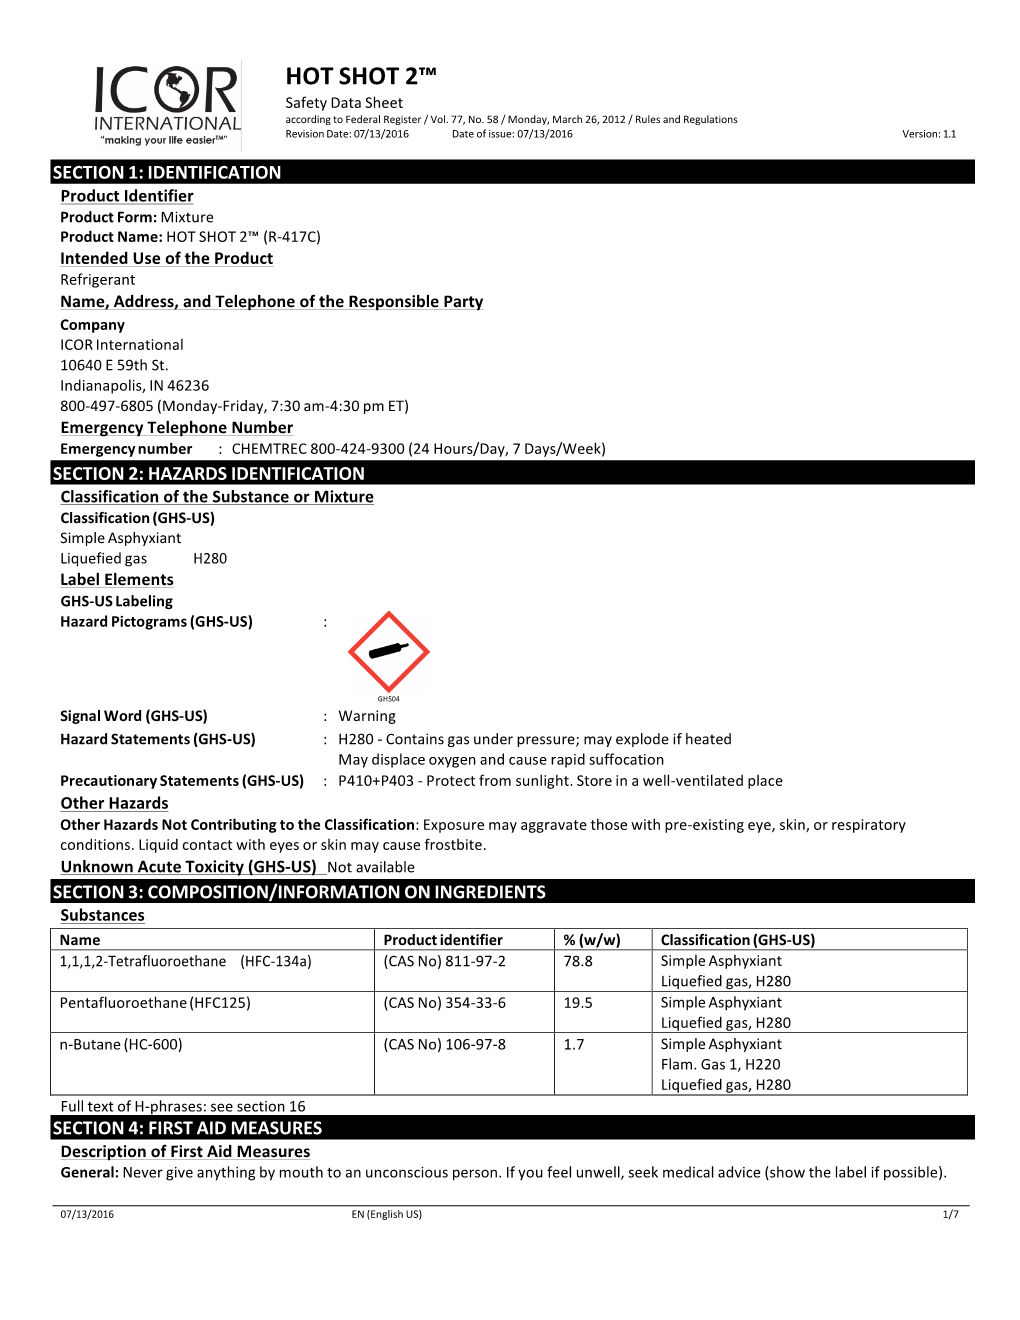 HOT SHOT 2™ Safety Data Sheet According to Federal Register / Vol